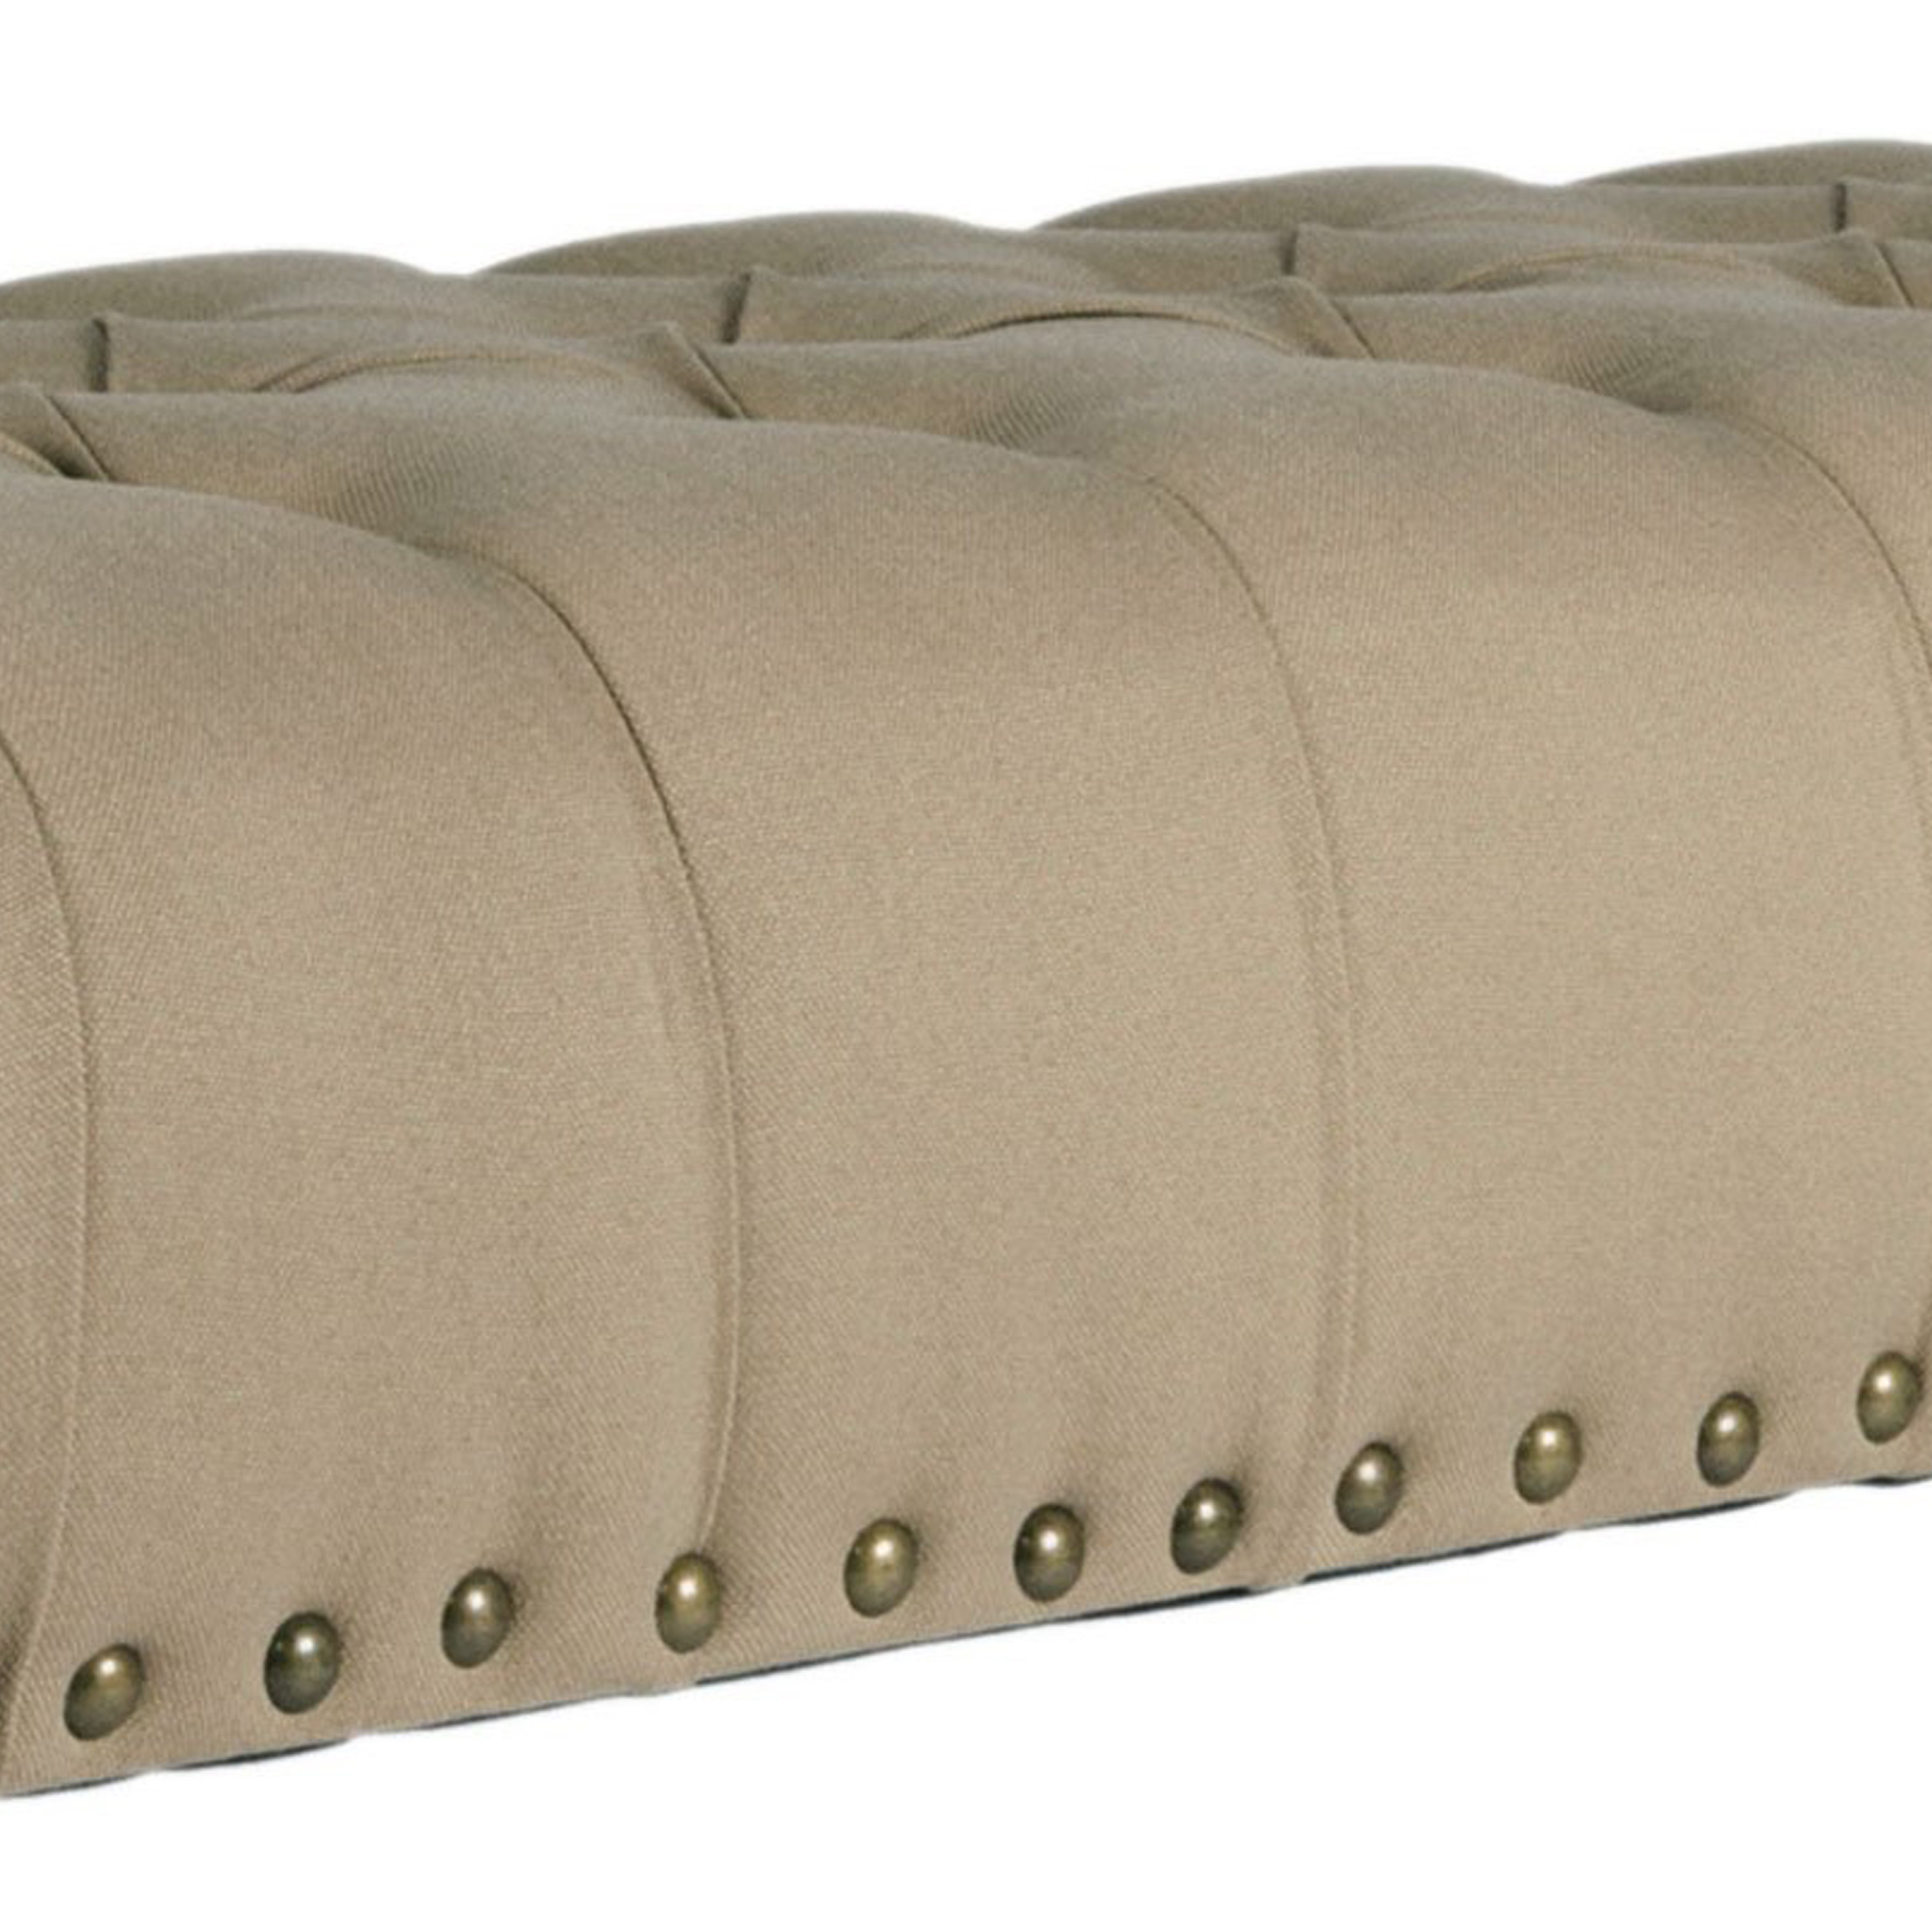 Wooden Bench With Button Tufted Fabric Padded Seat And Nail Head Trim, Beige And Brown- Saltoro Sherpi